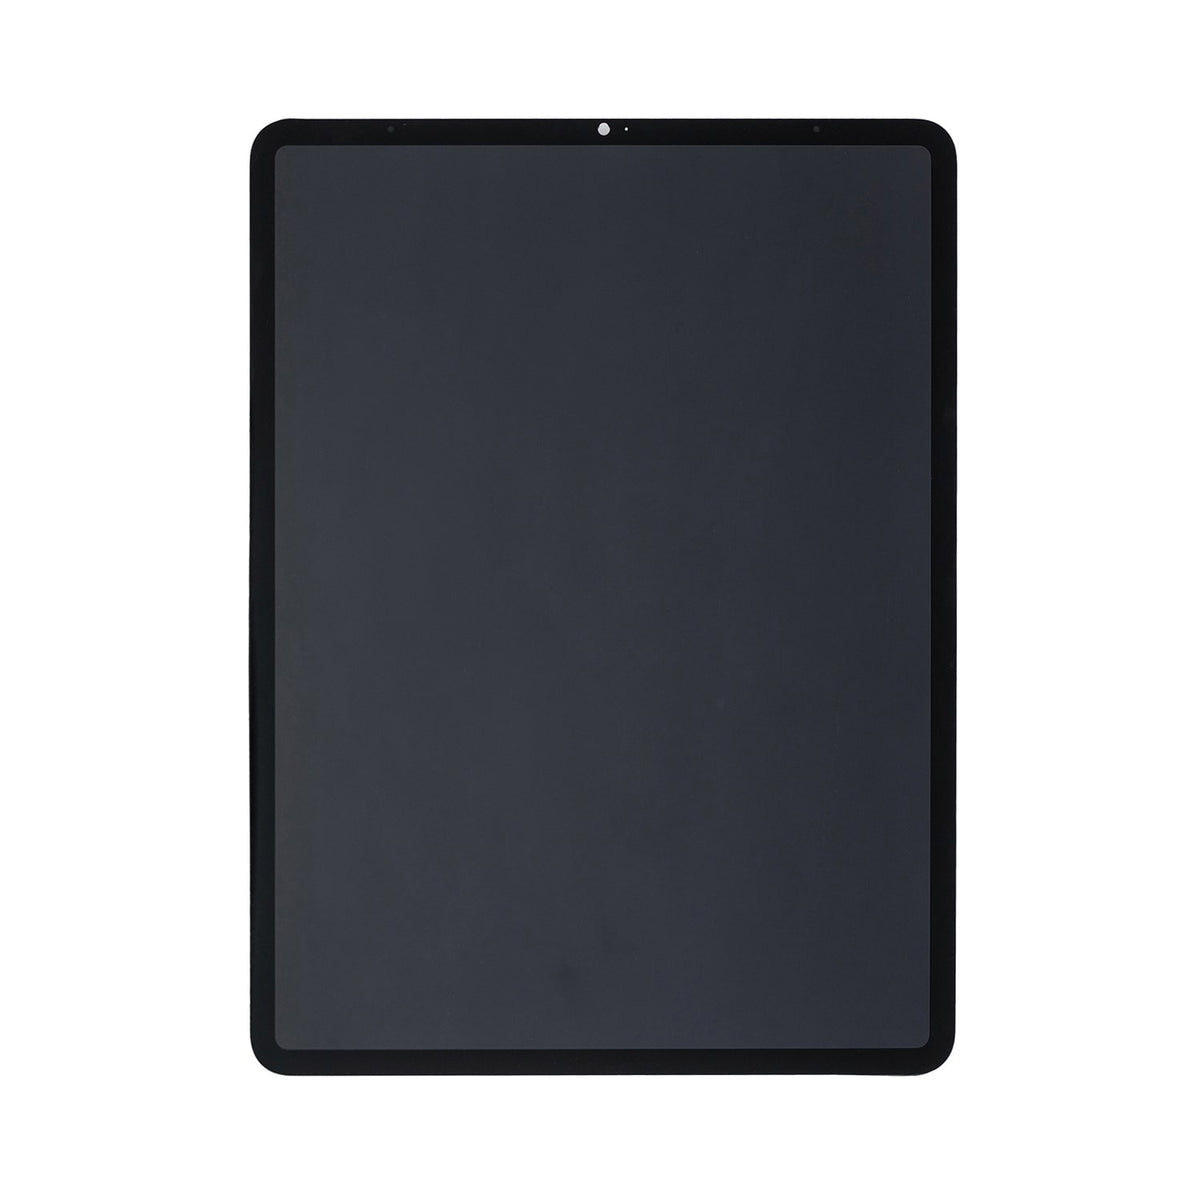 BLACK LCD WITH DIGITIZER ASSEMBLY FOR IPAD PRO 12.9" 5TH GEN